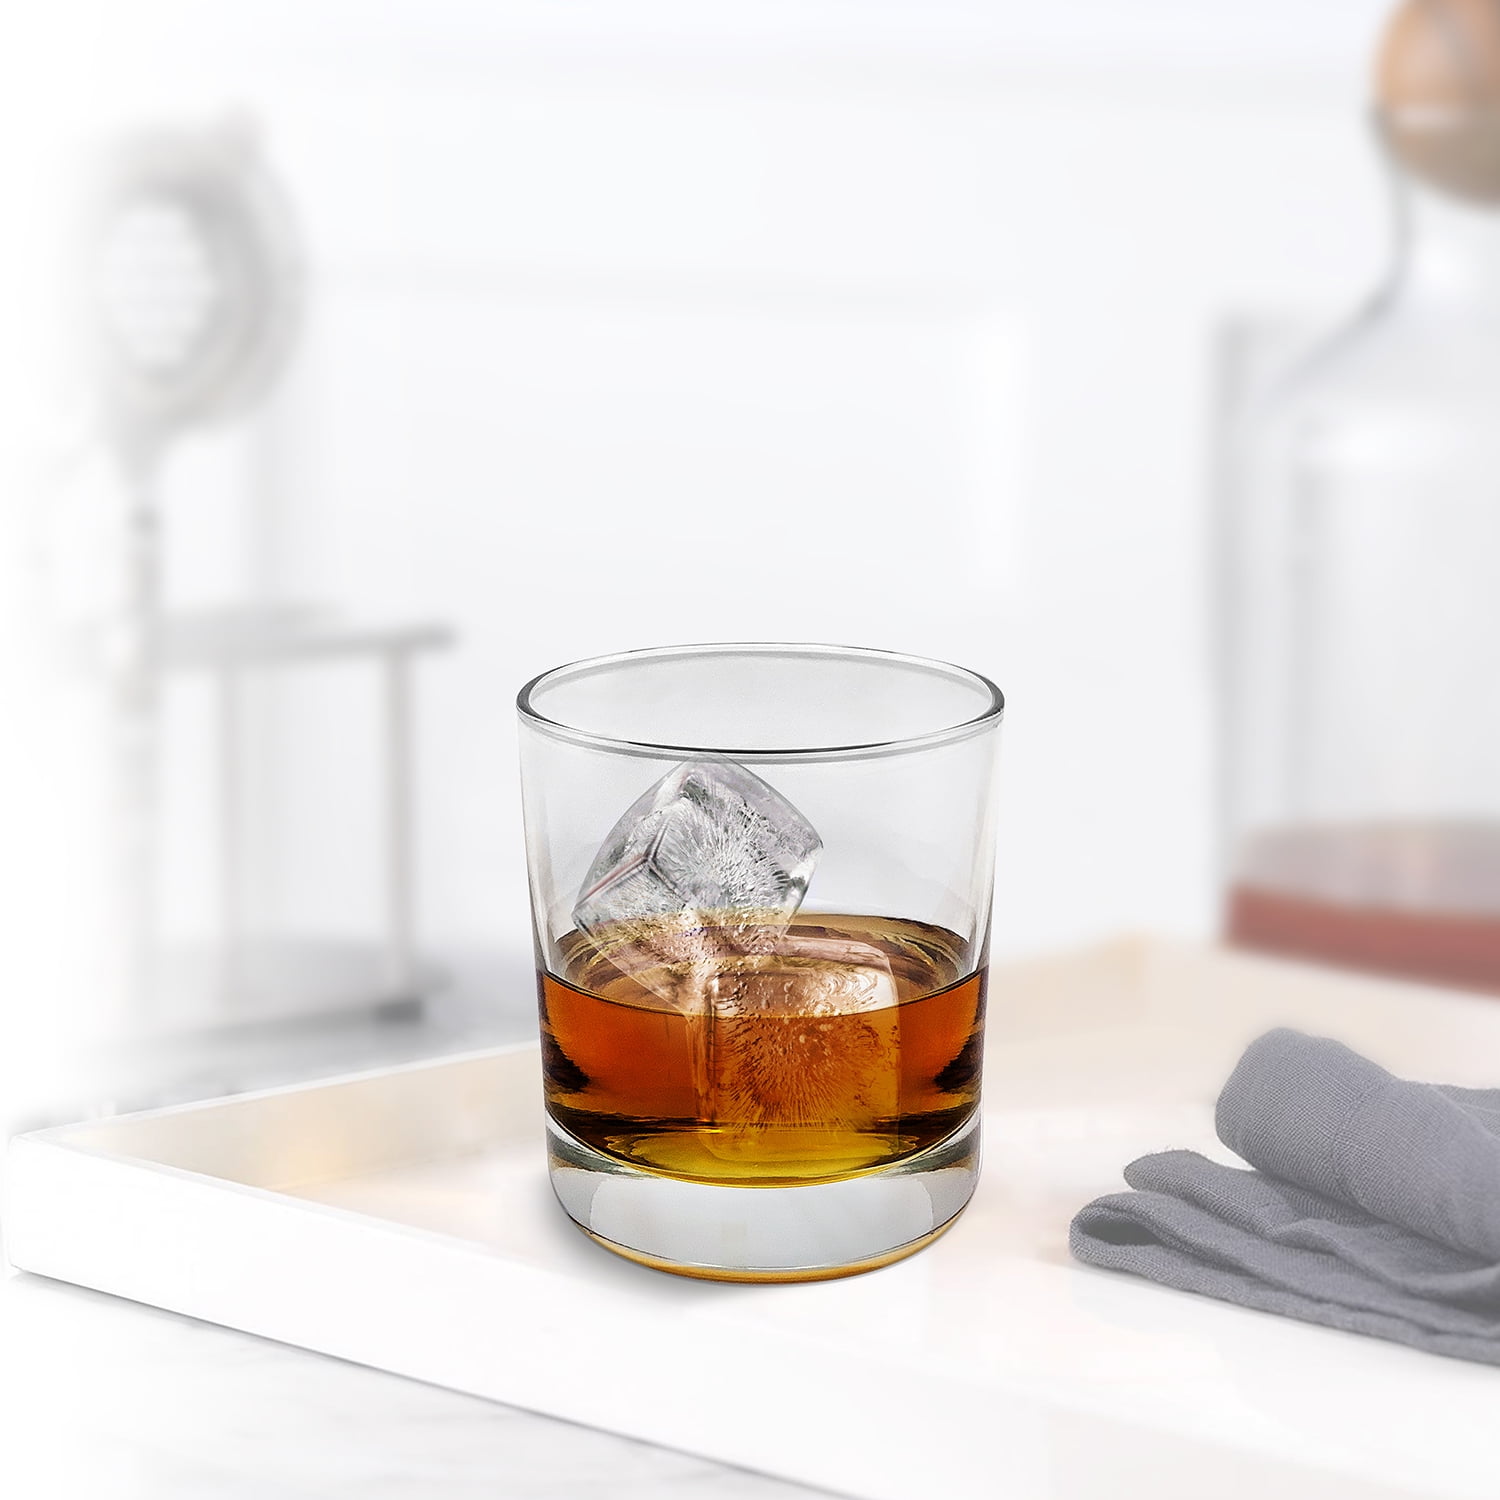 Tovolo Bulldog, Slow-Melting, Leak, Reusable, & BPA-Free Craft Ice Molds  for Whiskey, Cocktails, Coffee, Fun Drinks, and Gifts, Set of 2, Charcoal